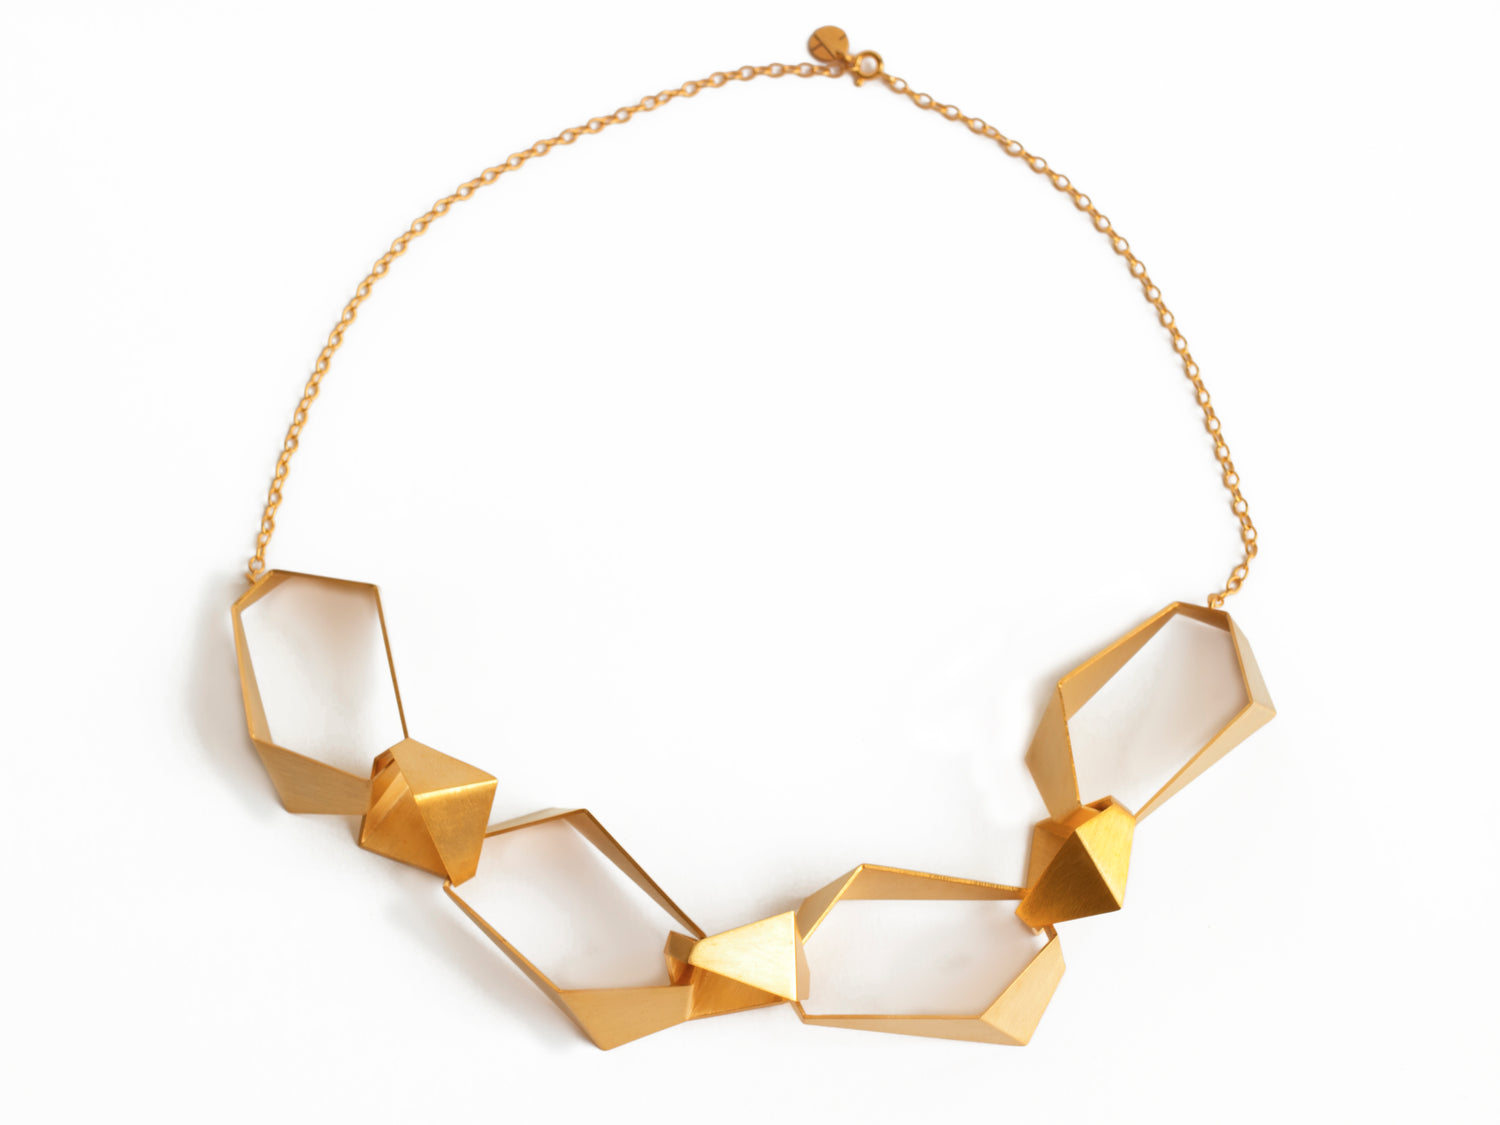 Geometric chunky link statement necklace made of 7 geometric links and gold chain